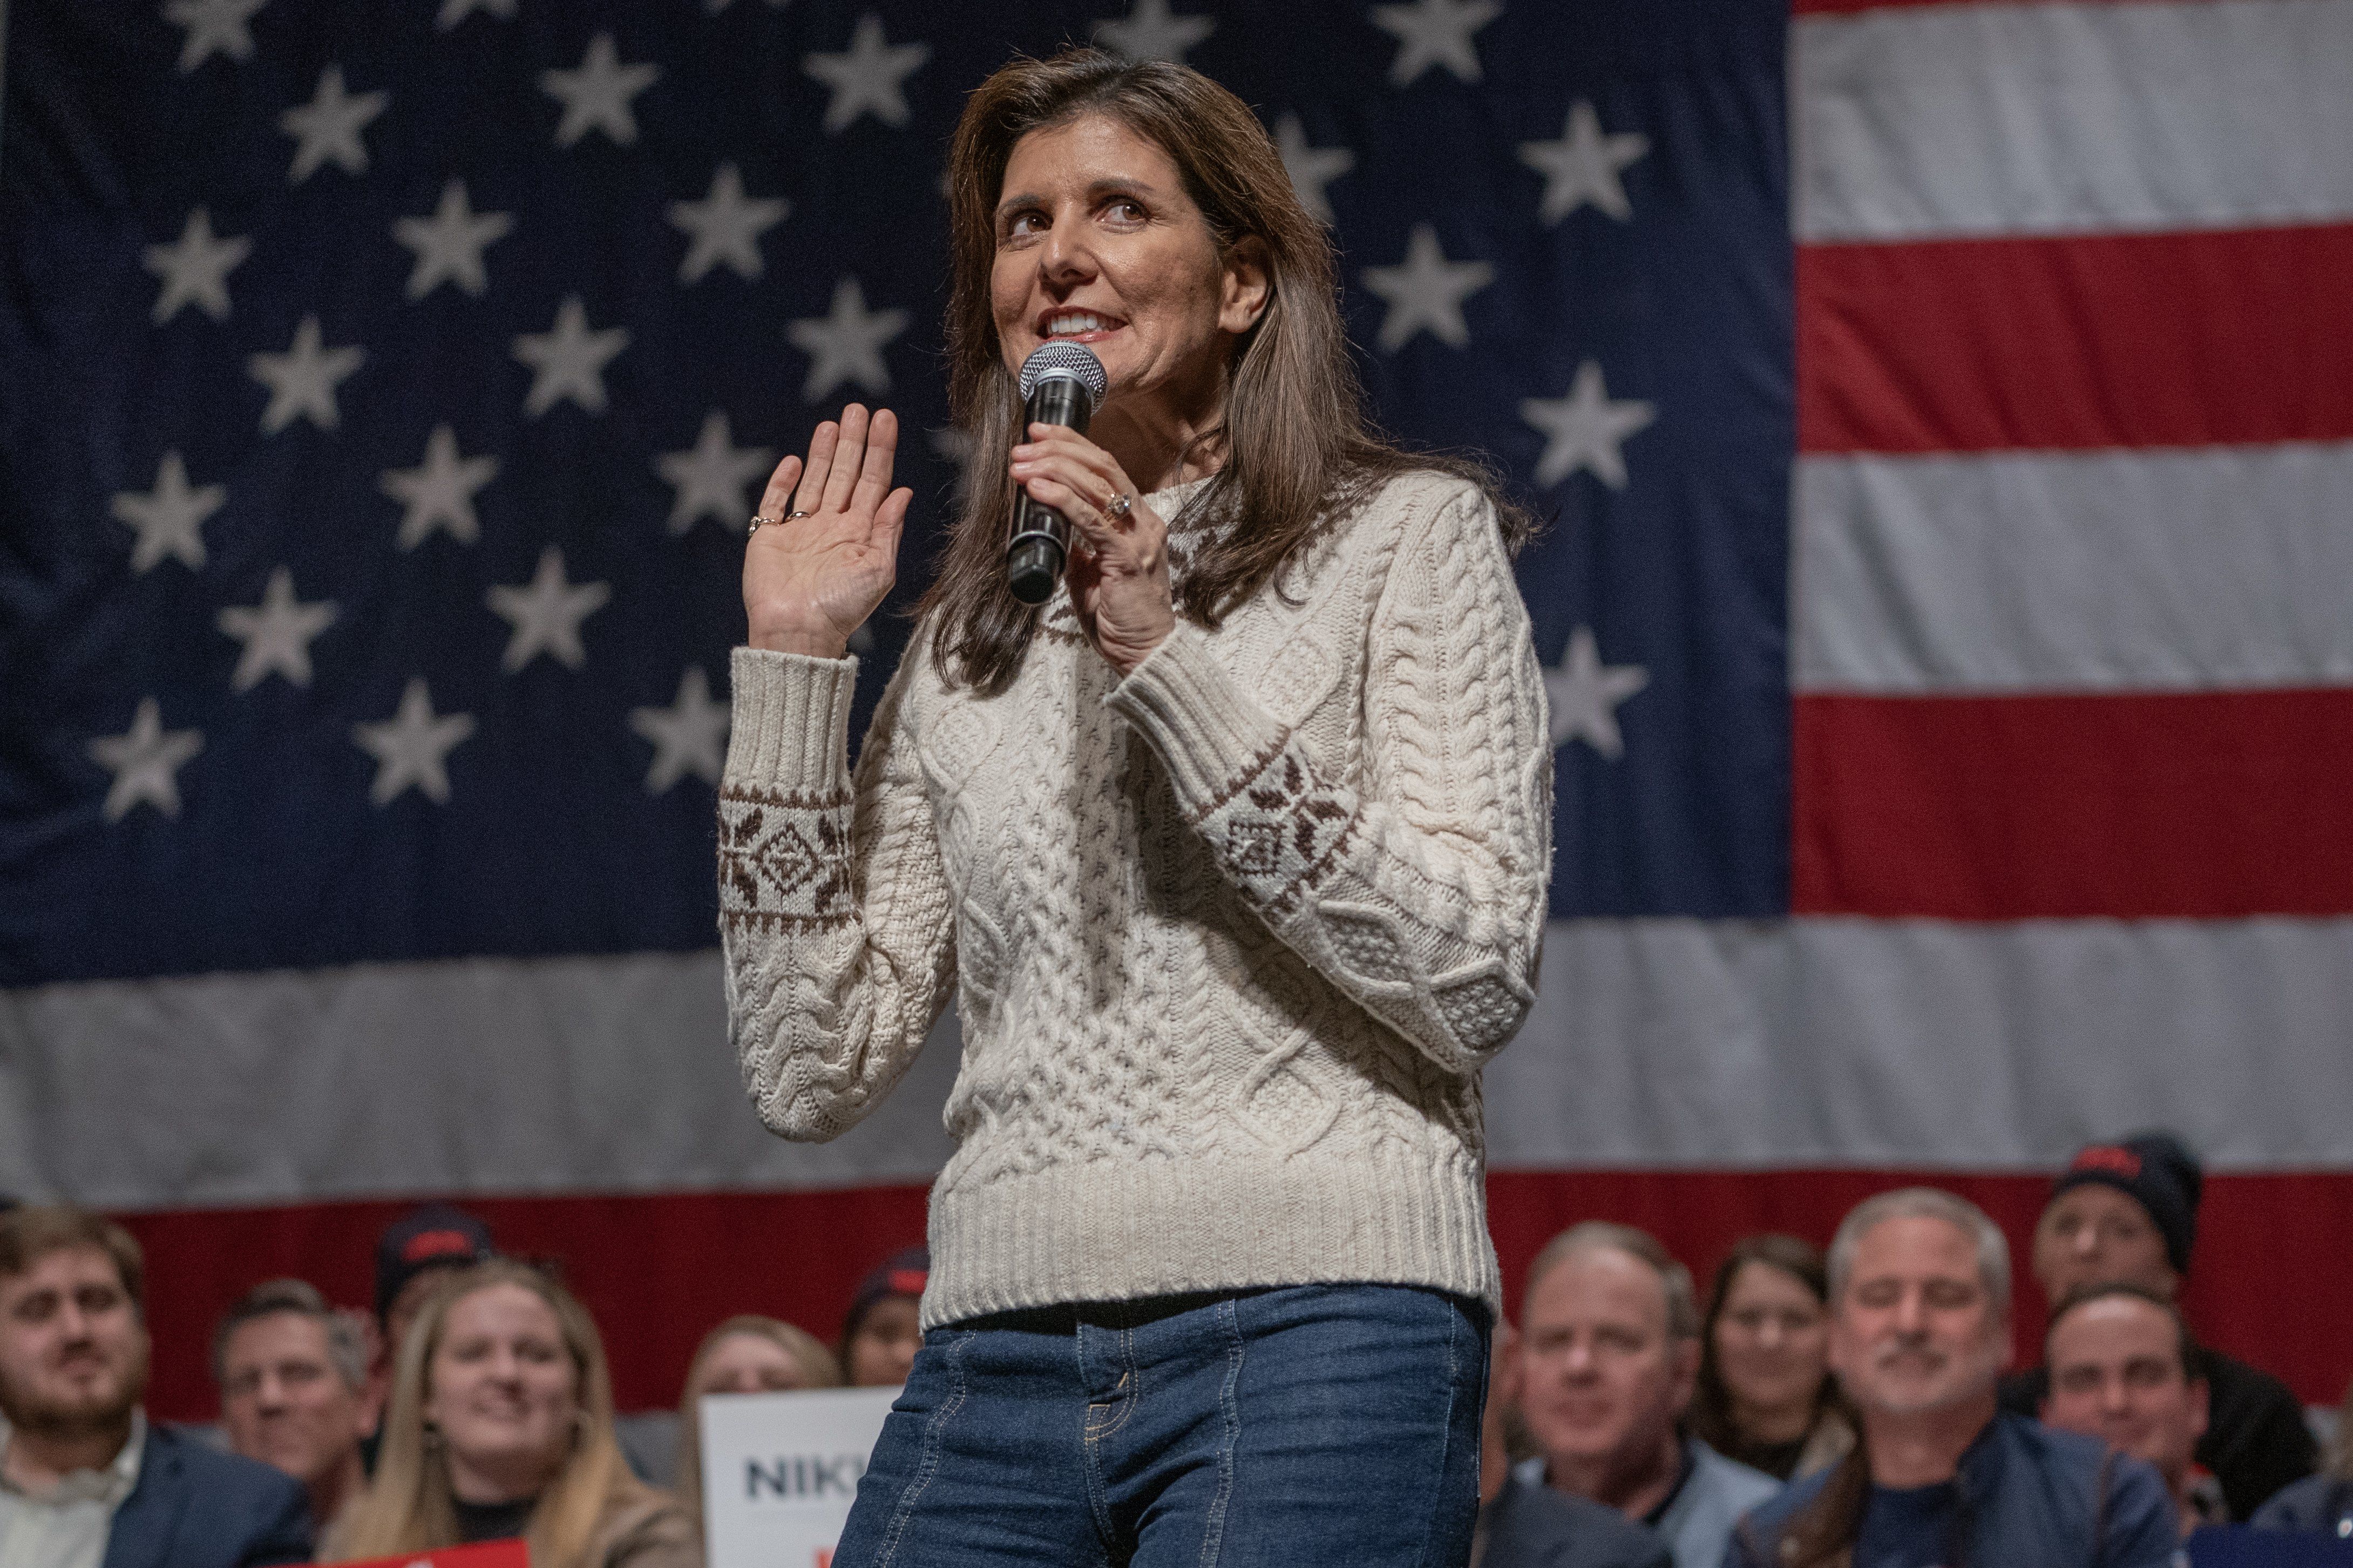 ​Nikki Haley, former U.N. Ambassador and Republican presidential candidate, delivers remarks during a campaign event in Exeter, New Hampshire on Jan. 21, 2023.